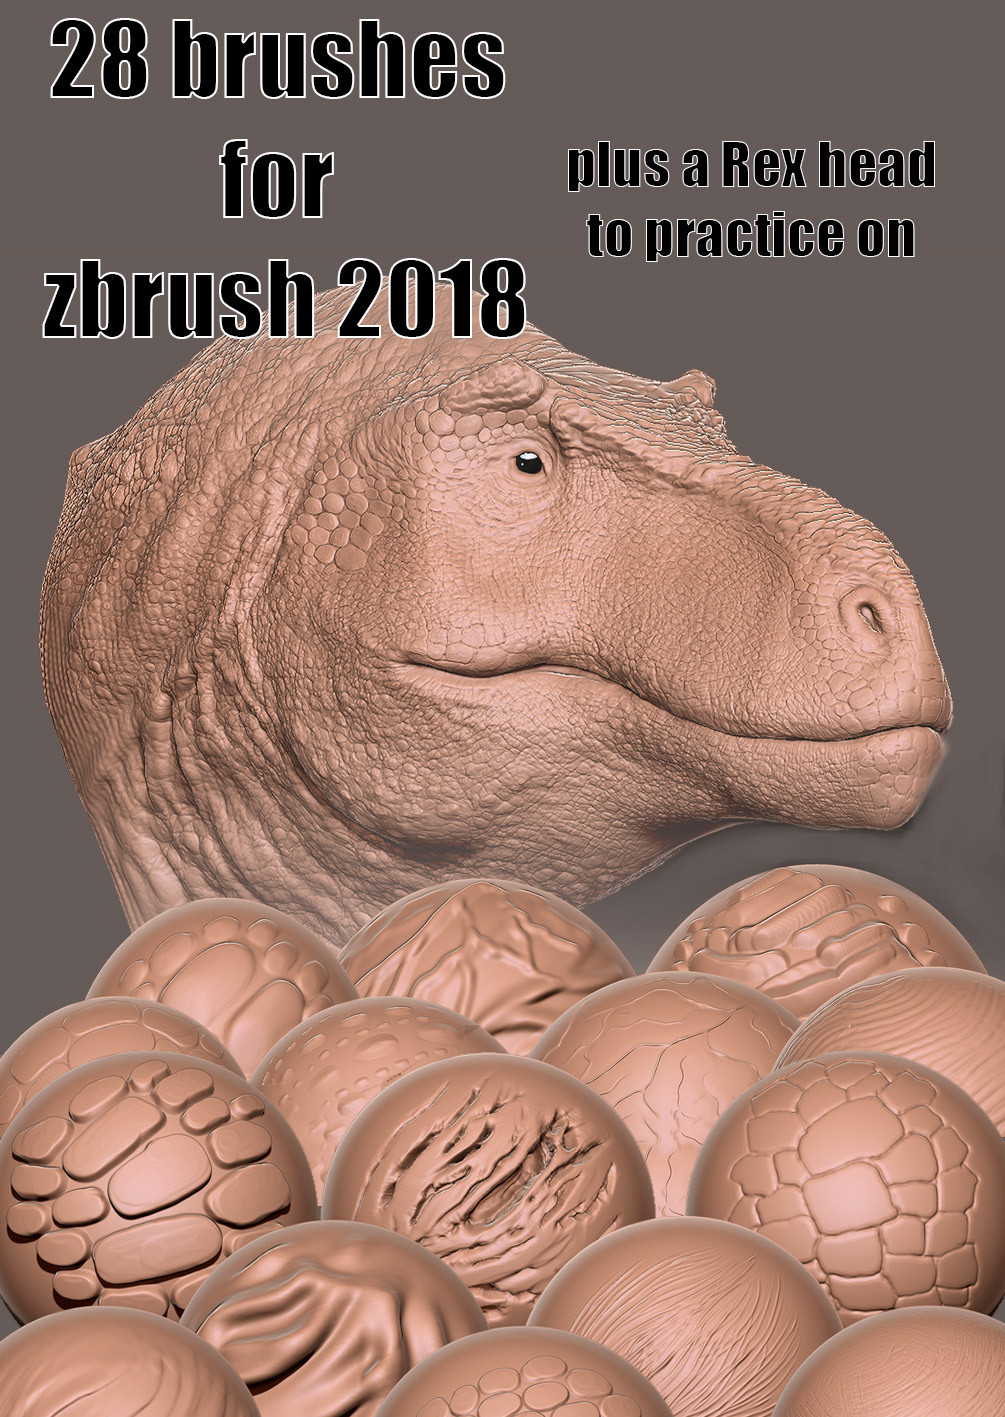 import my brushesd from 2018 to 2019 zbrush